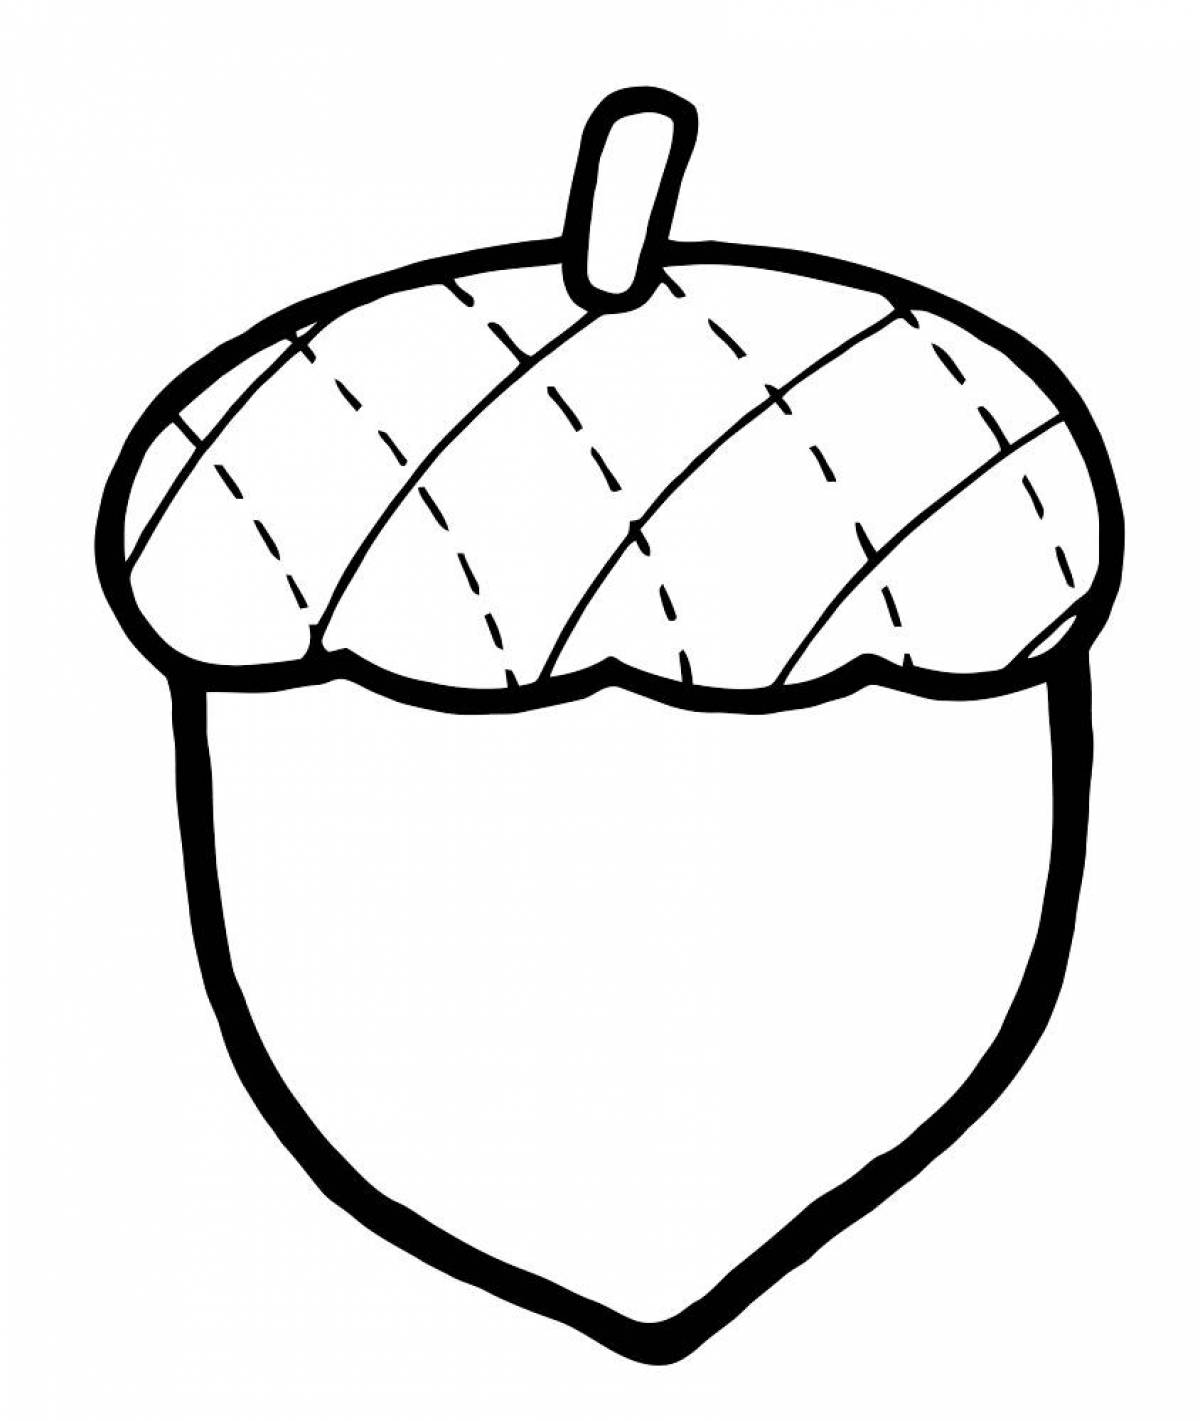 Nuts coloring page